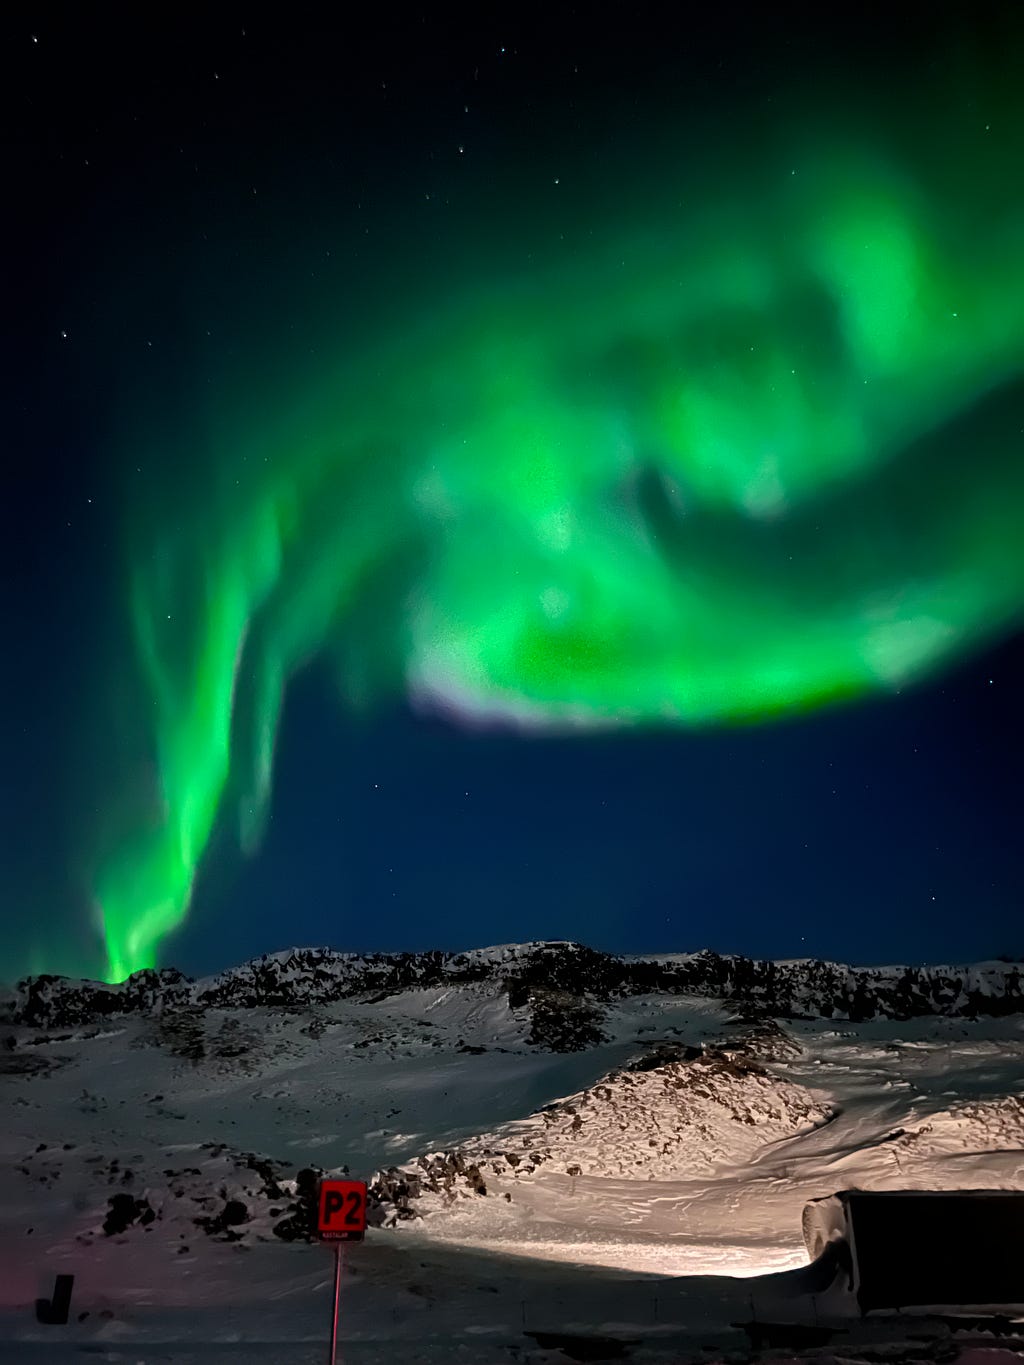 A mountain of snow with green Northern lights in the background.